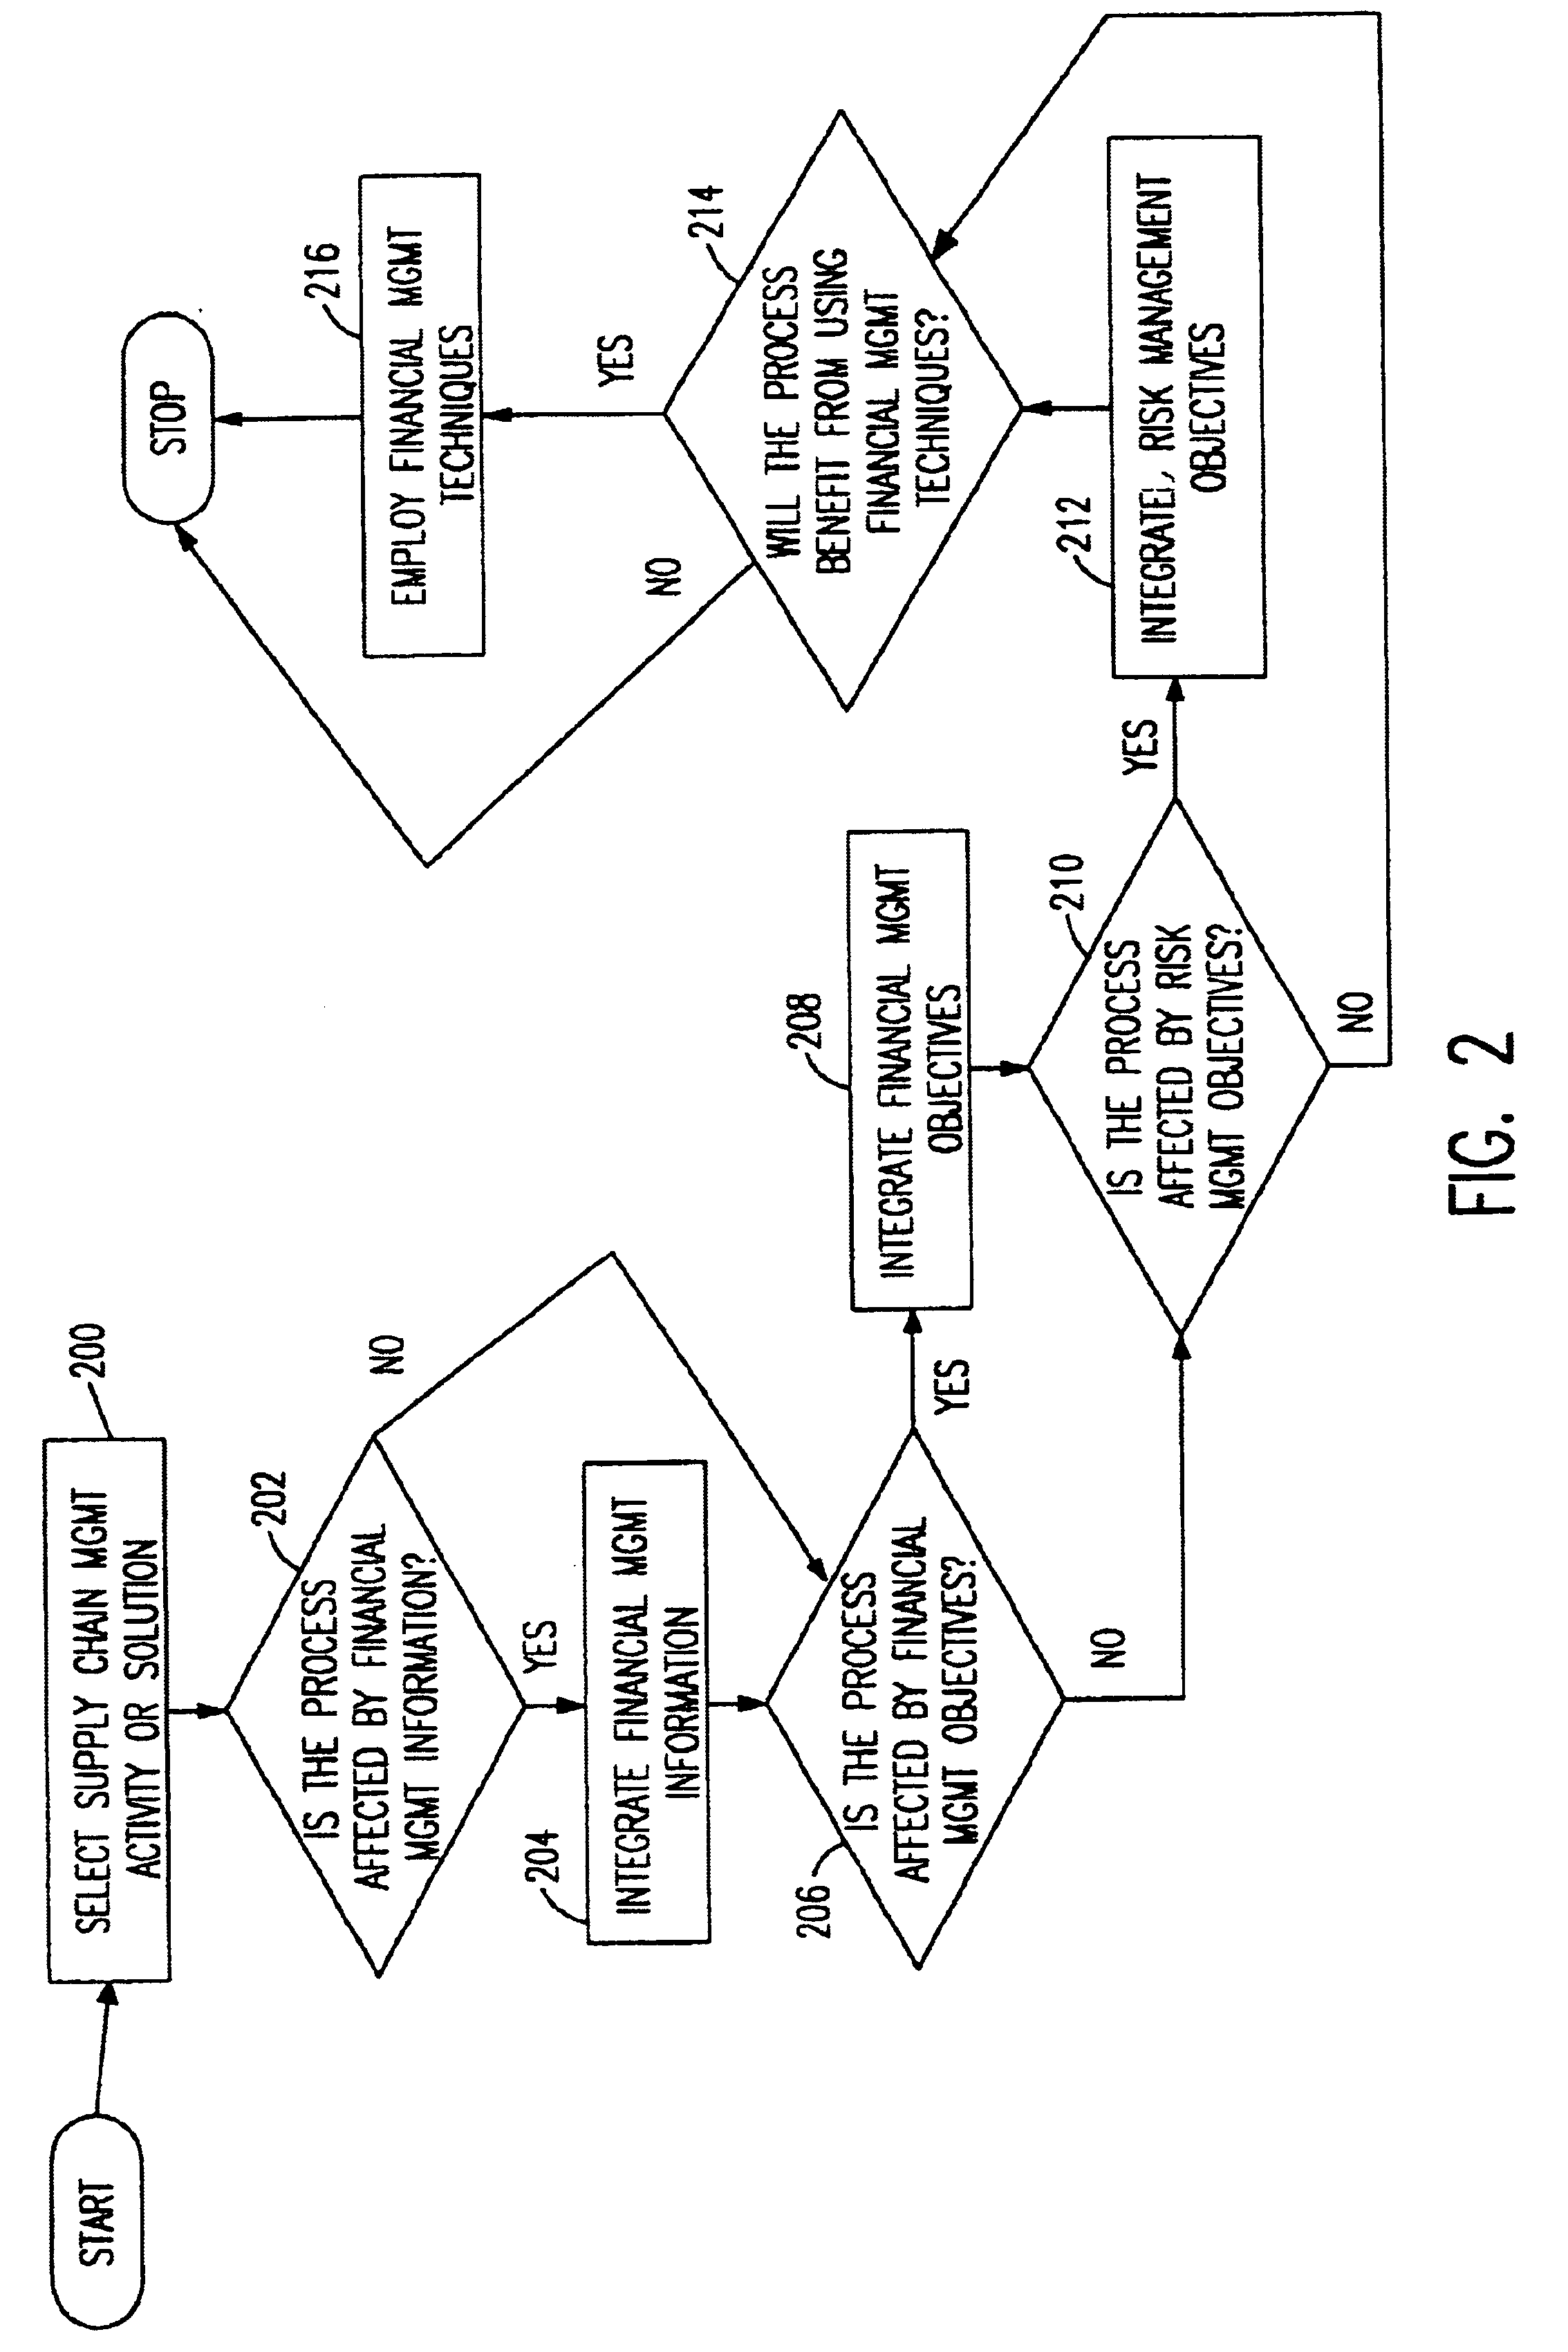 Method for integrated supply chain and financial management